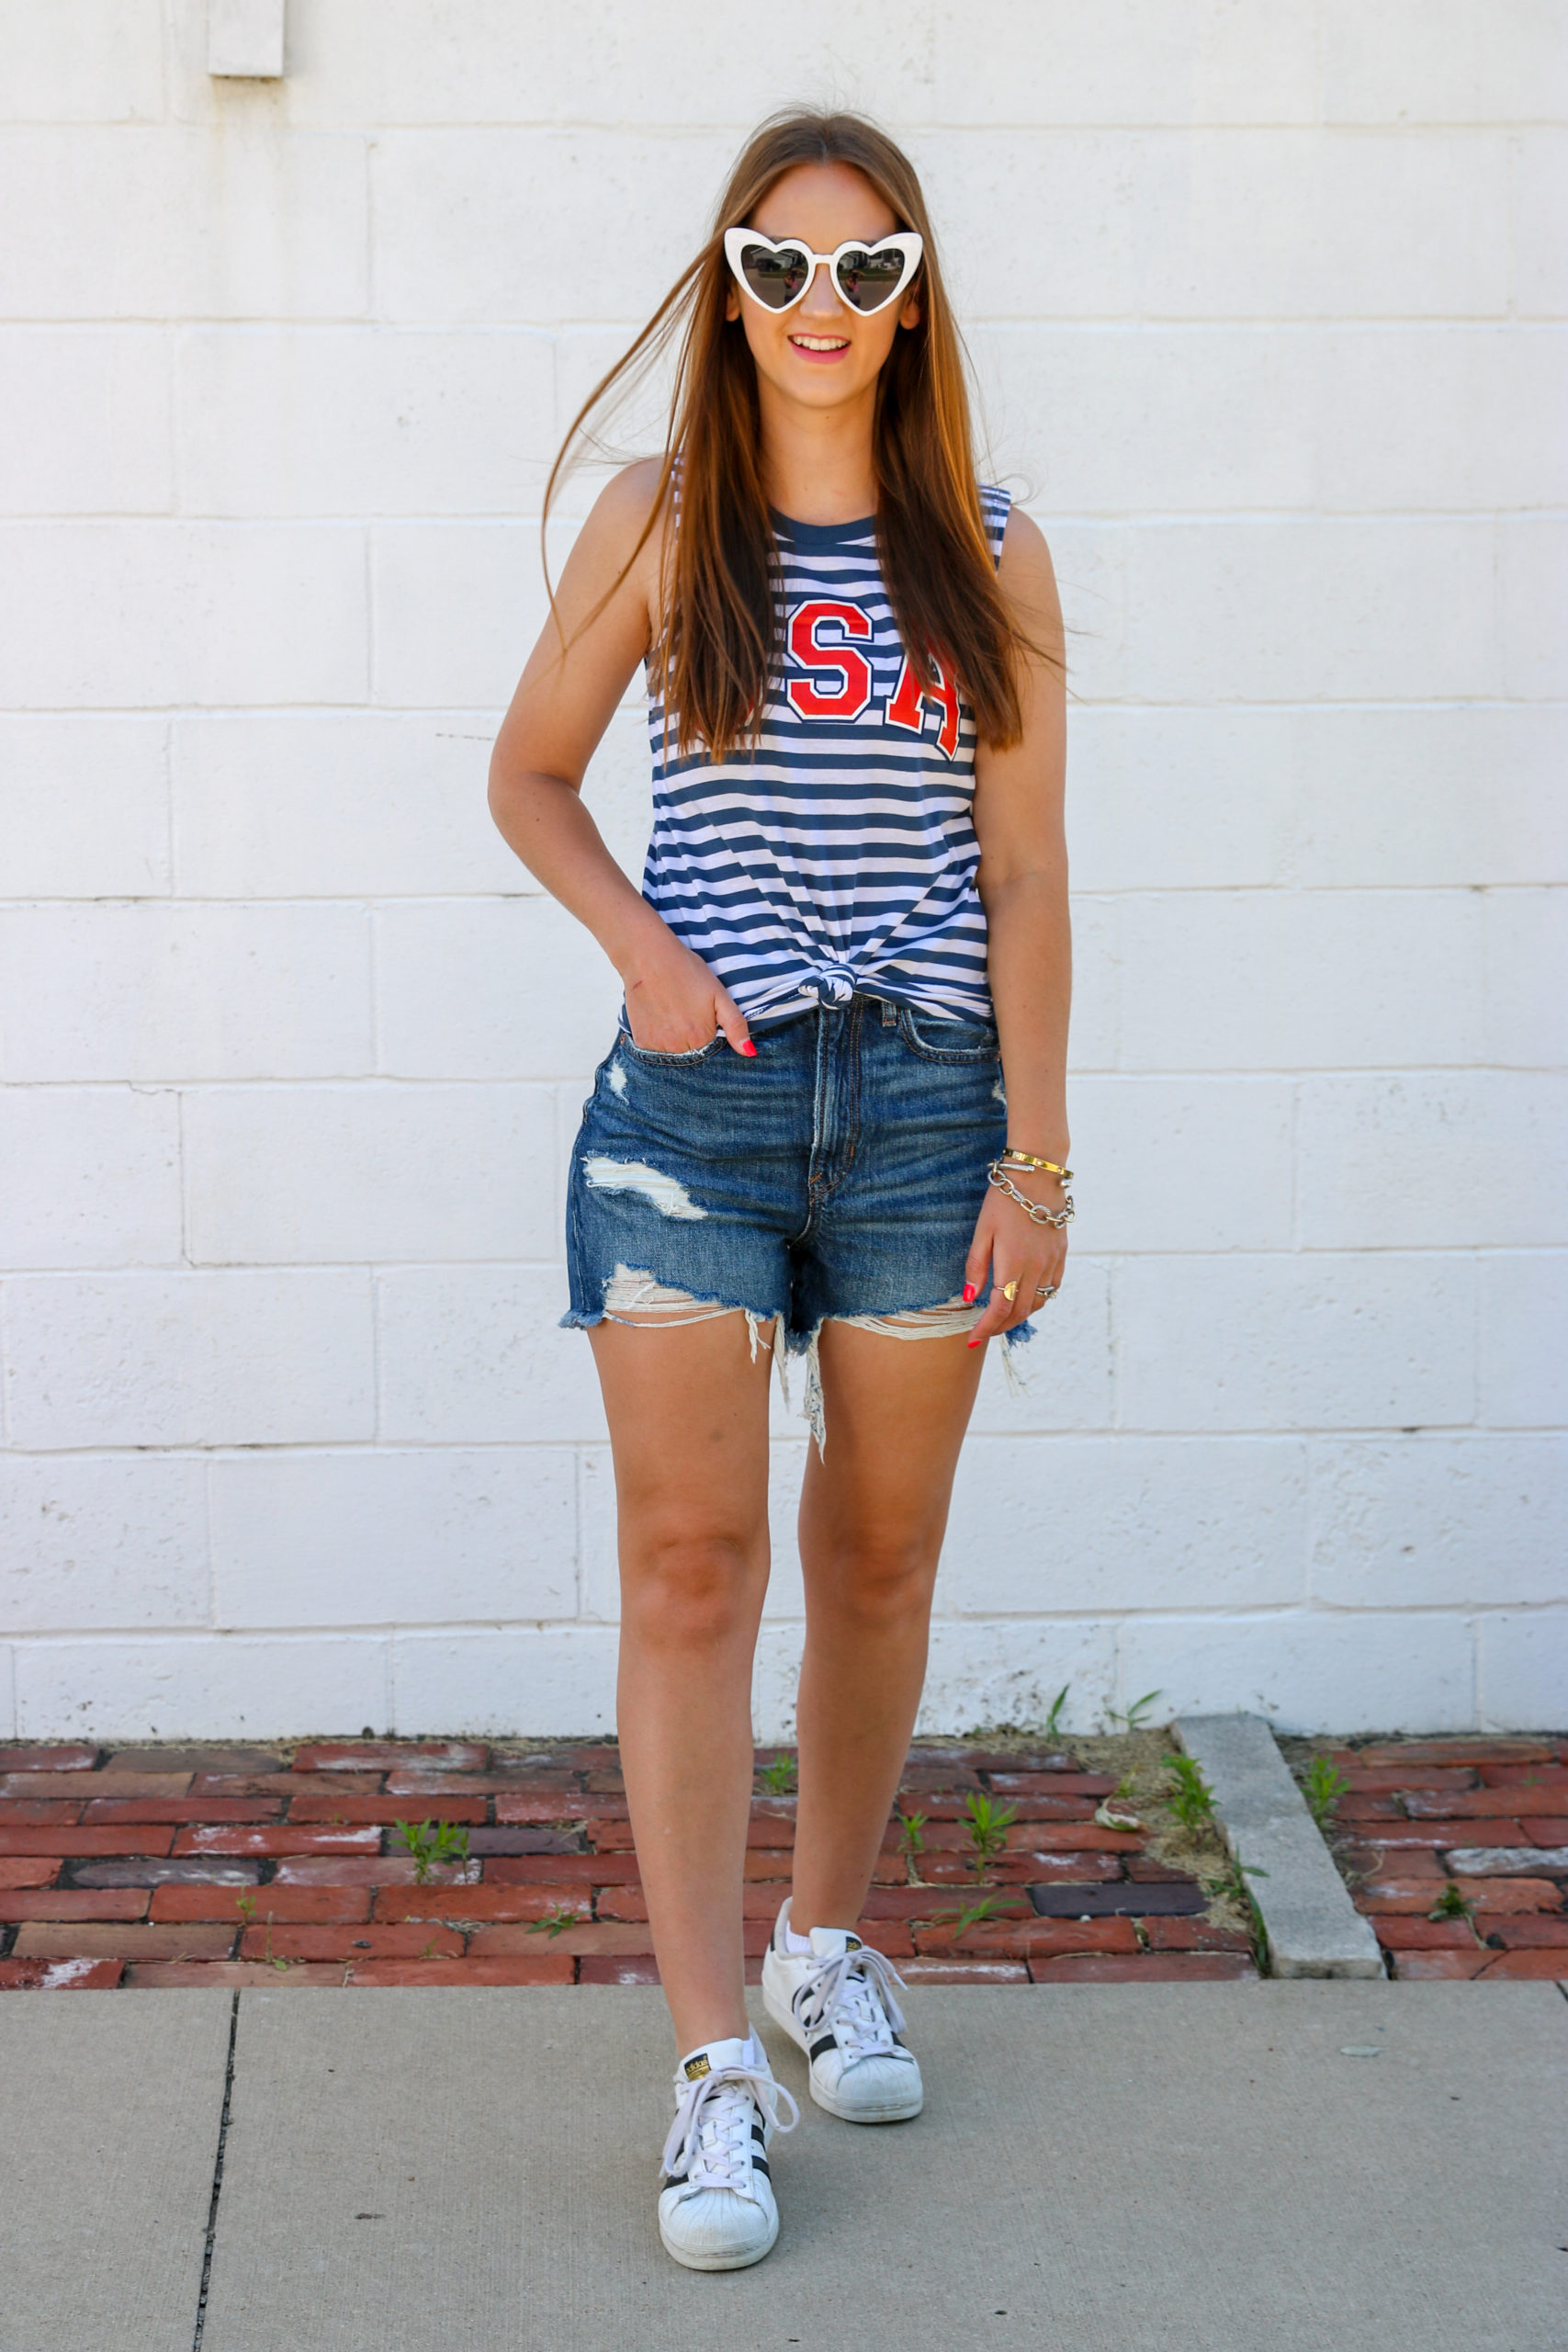 USA Graphic Tank Top - For The Love Of Glitter